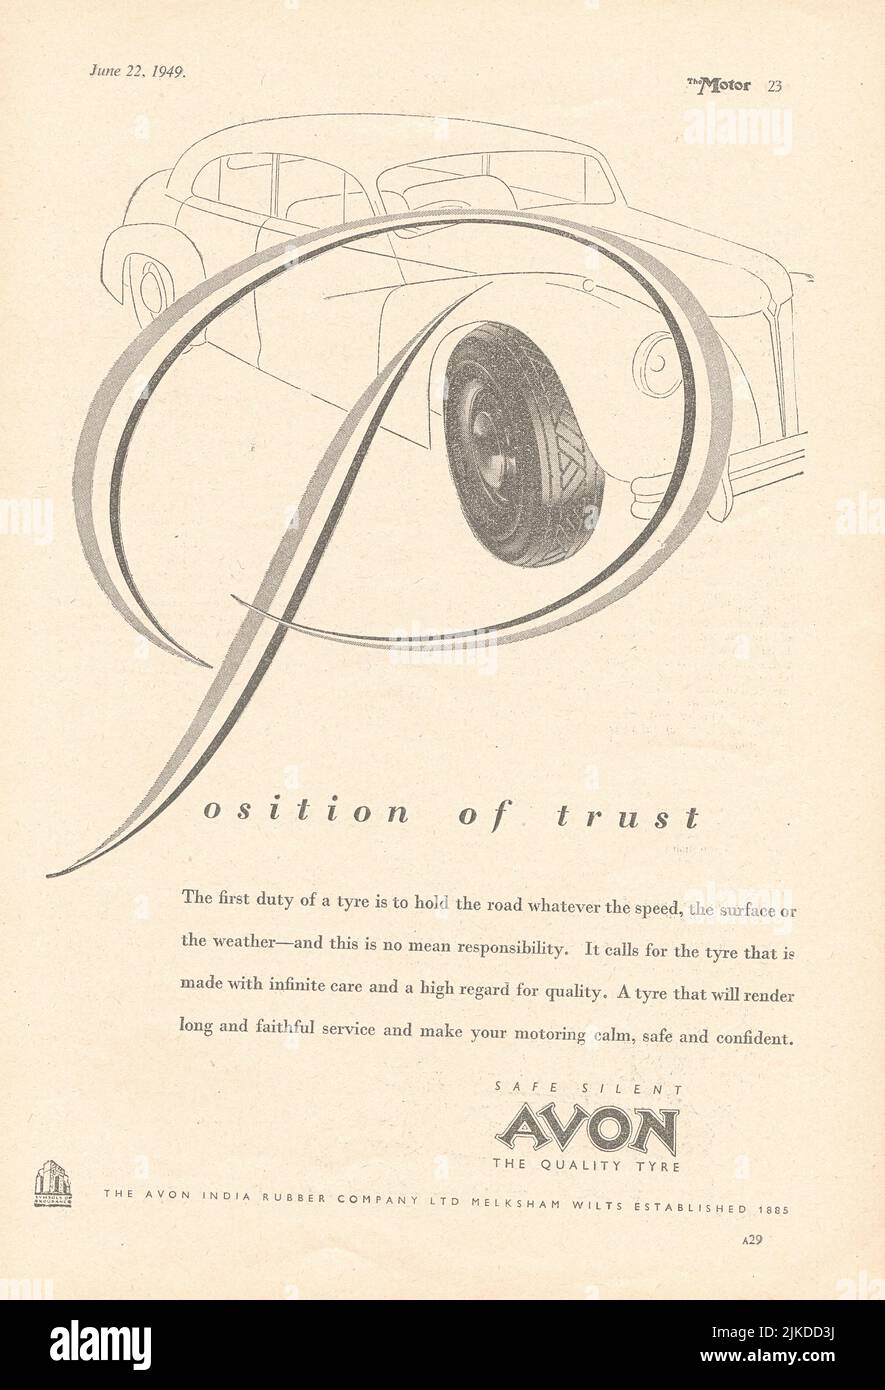 Avon Quality Tyre old vintage advertisement from a UK car magazine 1949 Stock Photo